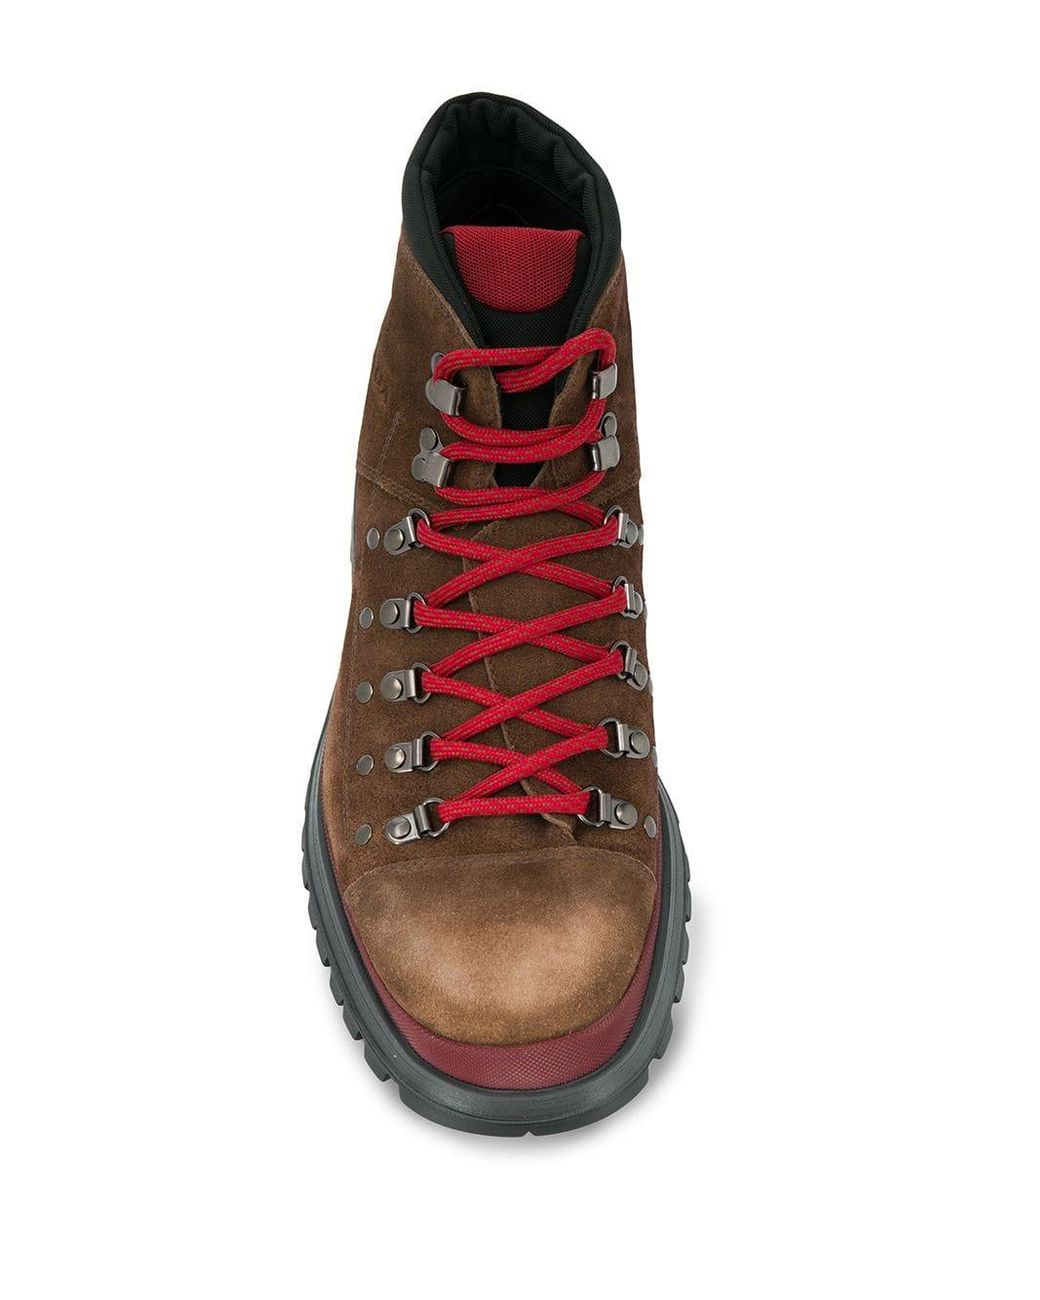 Prada Lace-up Hiking Boots in Brown for Men | Lyst